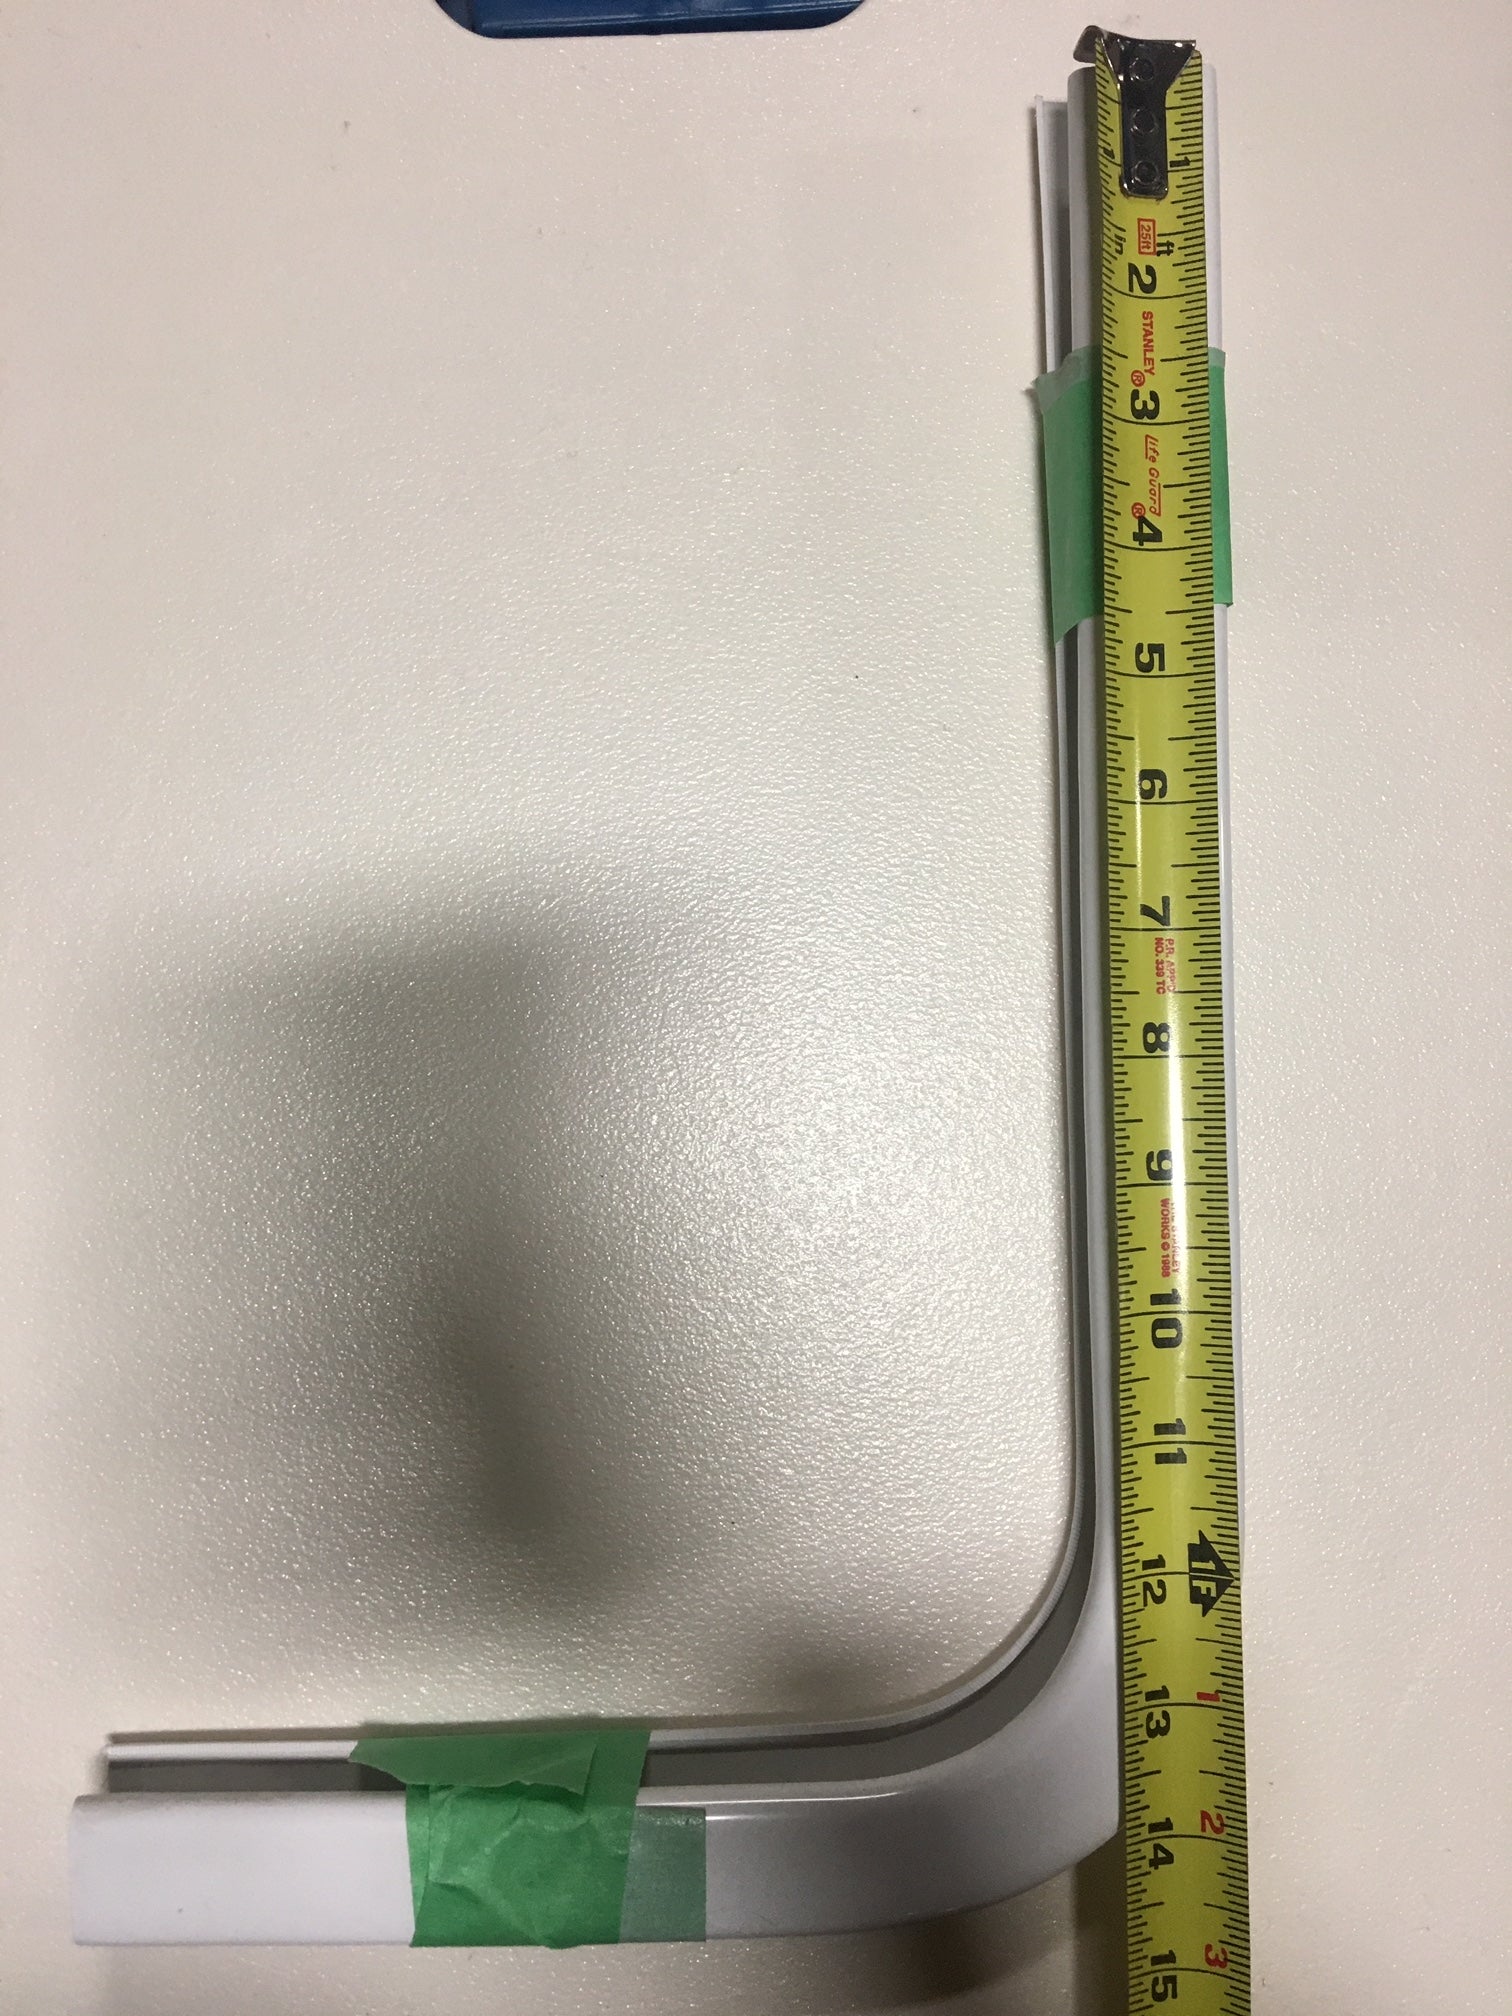 Left-Handed 25 FT Tape Measure with Rubber Guard